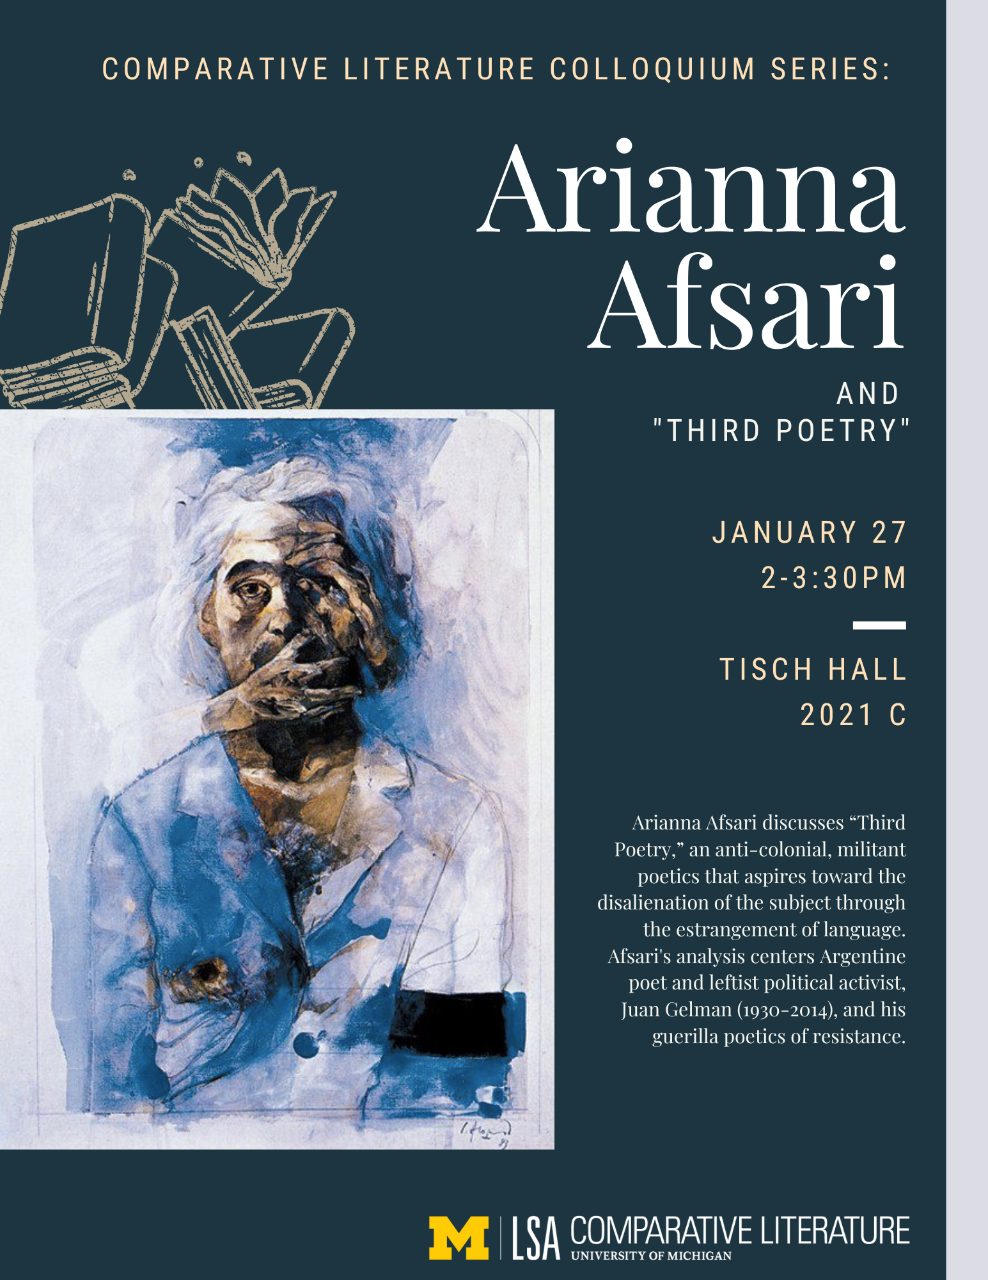 Text, “Comparative Literature Colloquium Series: Ariannna Afsari and ‘Third Poetry’, January 27, 2-3:30PM, Tisch Hall 2021 C. Arianna Afsari discusses ‘Third Poetry,’ an anti-colonial, militant poetics that aspires toward the disalienation of the subject through the estrangement of language. Afsari’s analysis centers Argentine poet and leftist political activist, Juan Gelman (1930-2014), and his guerilla poetics of resistance.”